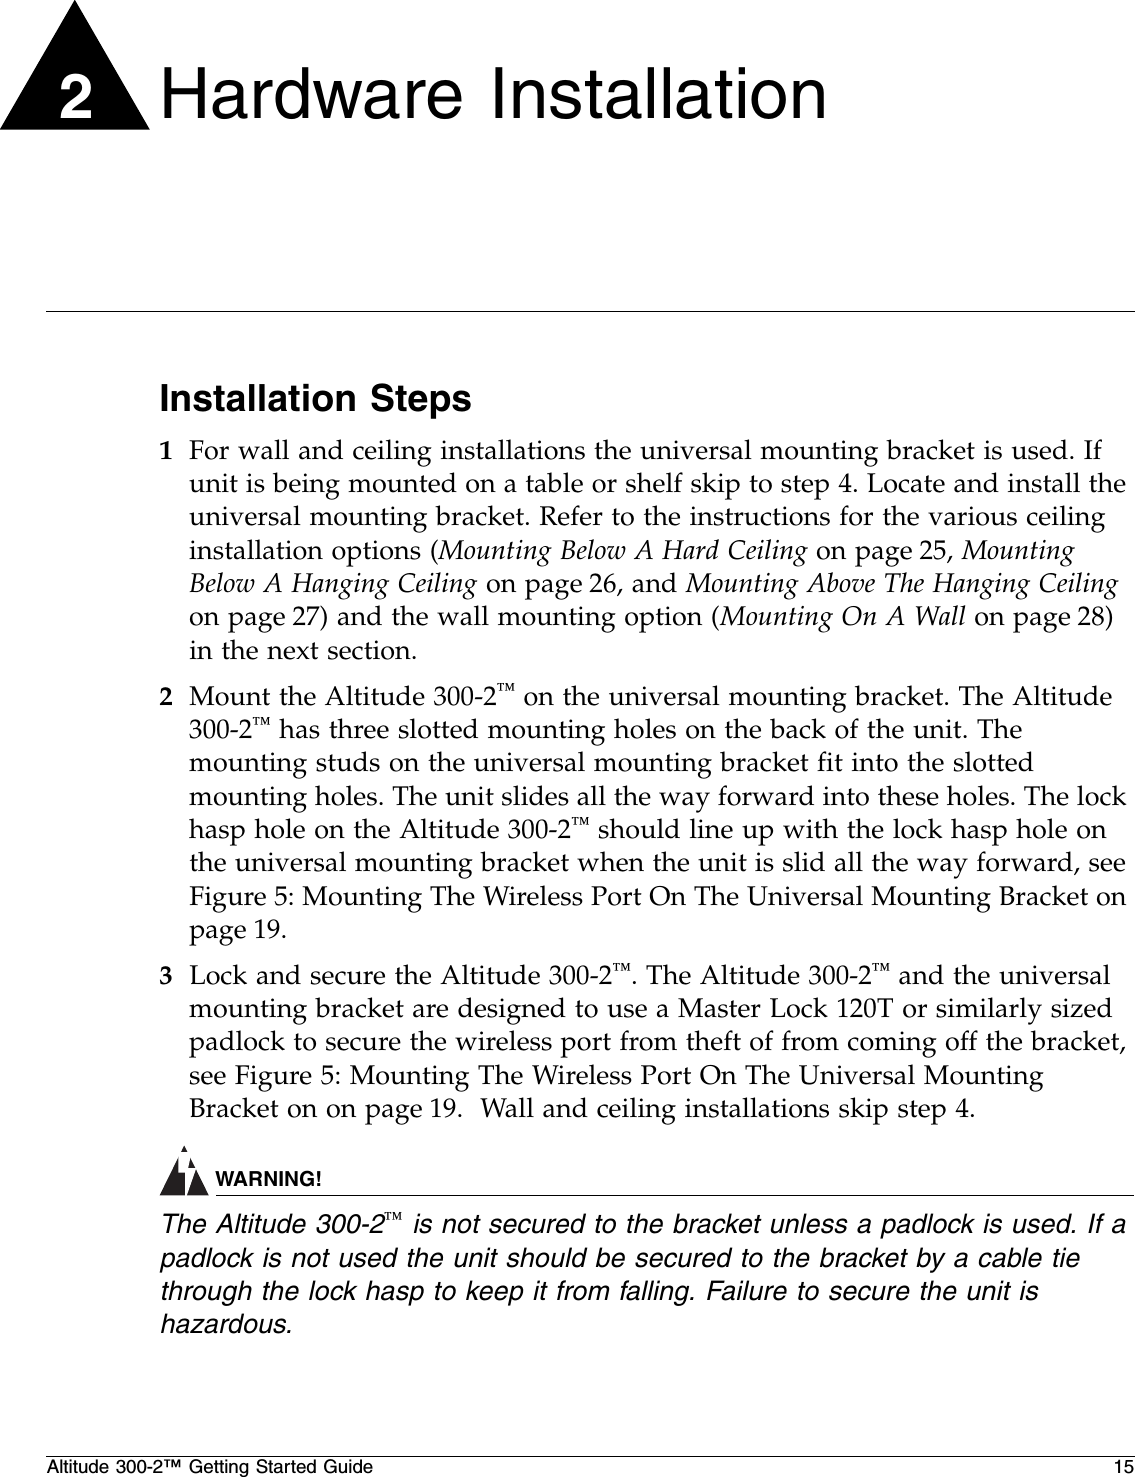 Altitude 300-2™ Getting Started Guide 152Hardware InstallationInstallation Steps1For wall and ceiling installations the universal mounting bracket is used. If unit is being mounted on a table or shelf skip to step 4. Locate and install the universal mounting bracket. Refer to the instructions for the various ceiling installation options (Mounting Below A Hard Ceiling on page 25, Mounting Below A Hanging Ceiling on page 26, and Mounting Above The Hanging Ceiling on page 27) and the wall mounting option (Mounting On A Wall on page 28) in the next section.2Mount the Altitude 300-2™ on the universal mounting bracket. The Altitude 300-2™ has three slotted mounting holes on the back of the unit. The mounting studs on the universal mounting bracket fit into the slotted mounting holes. The unit slides all the way forward into these holes. The lock hasp hole on the Altitude 300-2™ should line up with the lock hasp hole on the universal mounting bracket when the unit is slid all the way forward, see Figure 5: Mounting The Wireless Port On The Universal Mounting Bracket on page 19.3Lock and secure the Altitude 300-2™. The Altitude 300-2™ and the universal mounting bracket are designed to use a Master Lock 120T or similarly sized padlock to secure the wireless port from theft of from coming off the bracket, see Figure 5: Mounting The Wireless Port On The Universal Mounting Bracket on on page 19.  Wall and ceiling installations skip step 4.WARNING!The Altitude 300-2™ is not secured to the bracket unless a padlock is used. If a padlock is not used the unit should be secured to the bracket by a cable tie through the lock hasp to keep it from falling. Failure to secure the unit is hazardous.